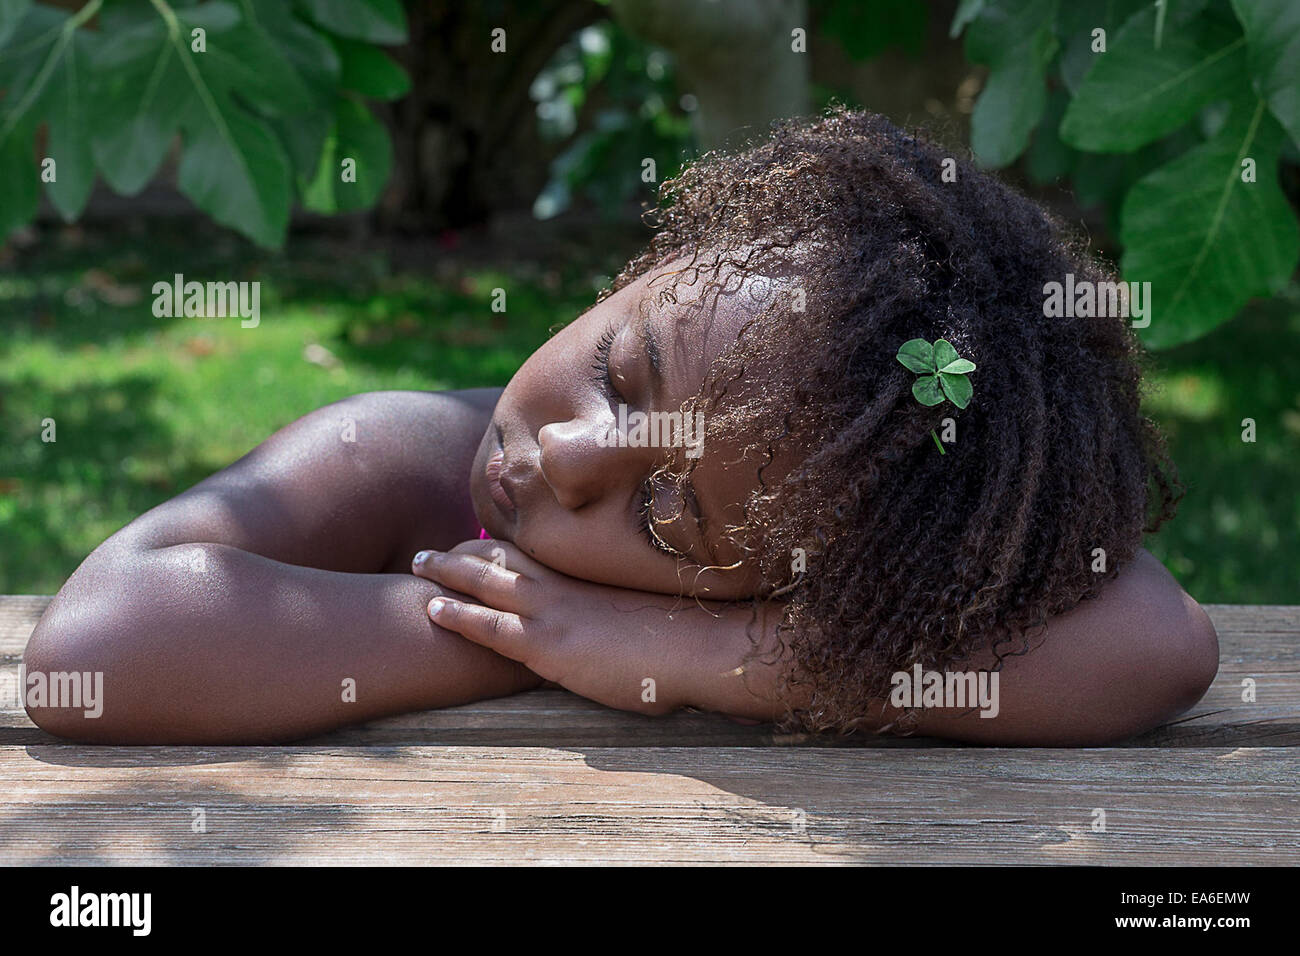 Young girl napping with her head resting on table Stock Photo